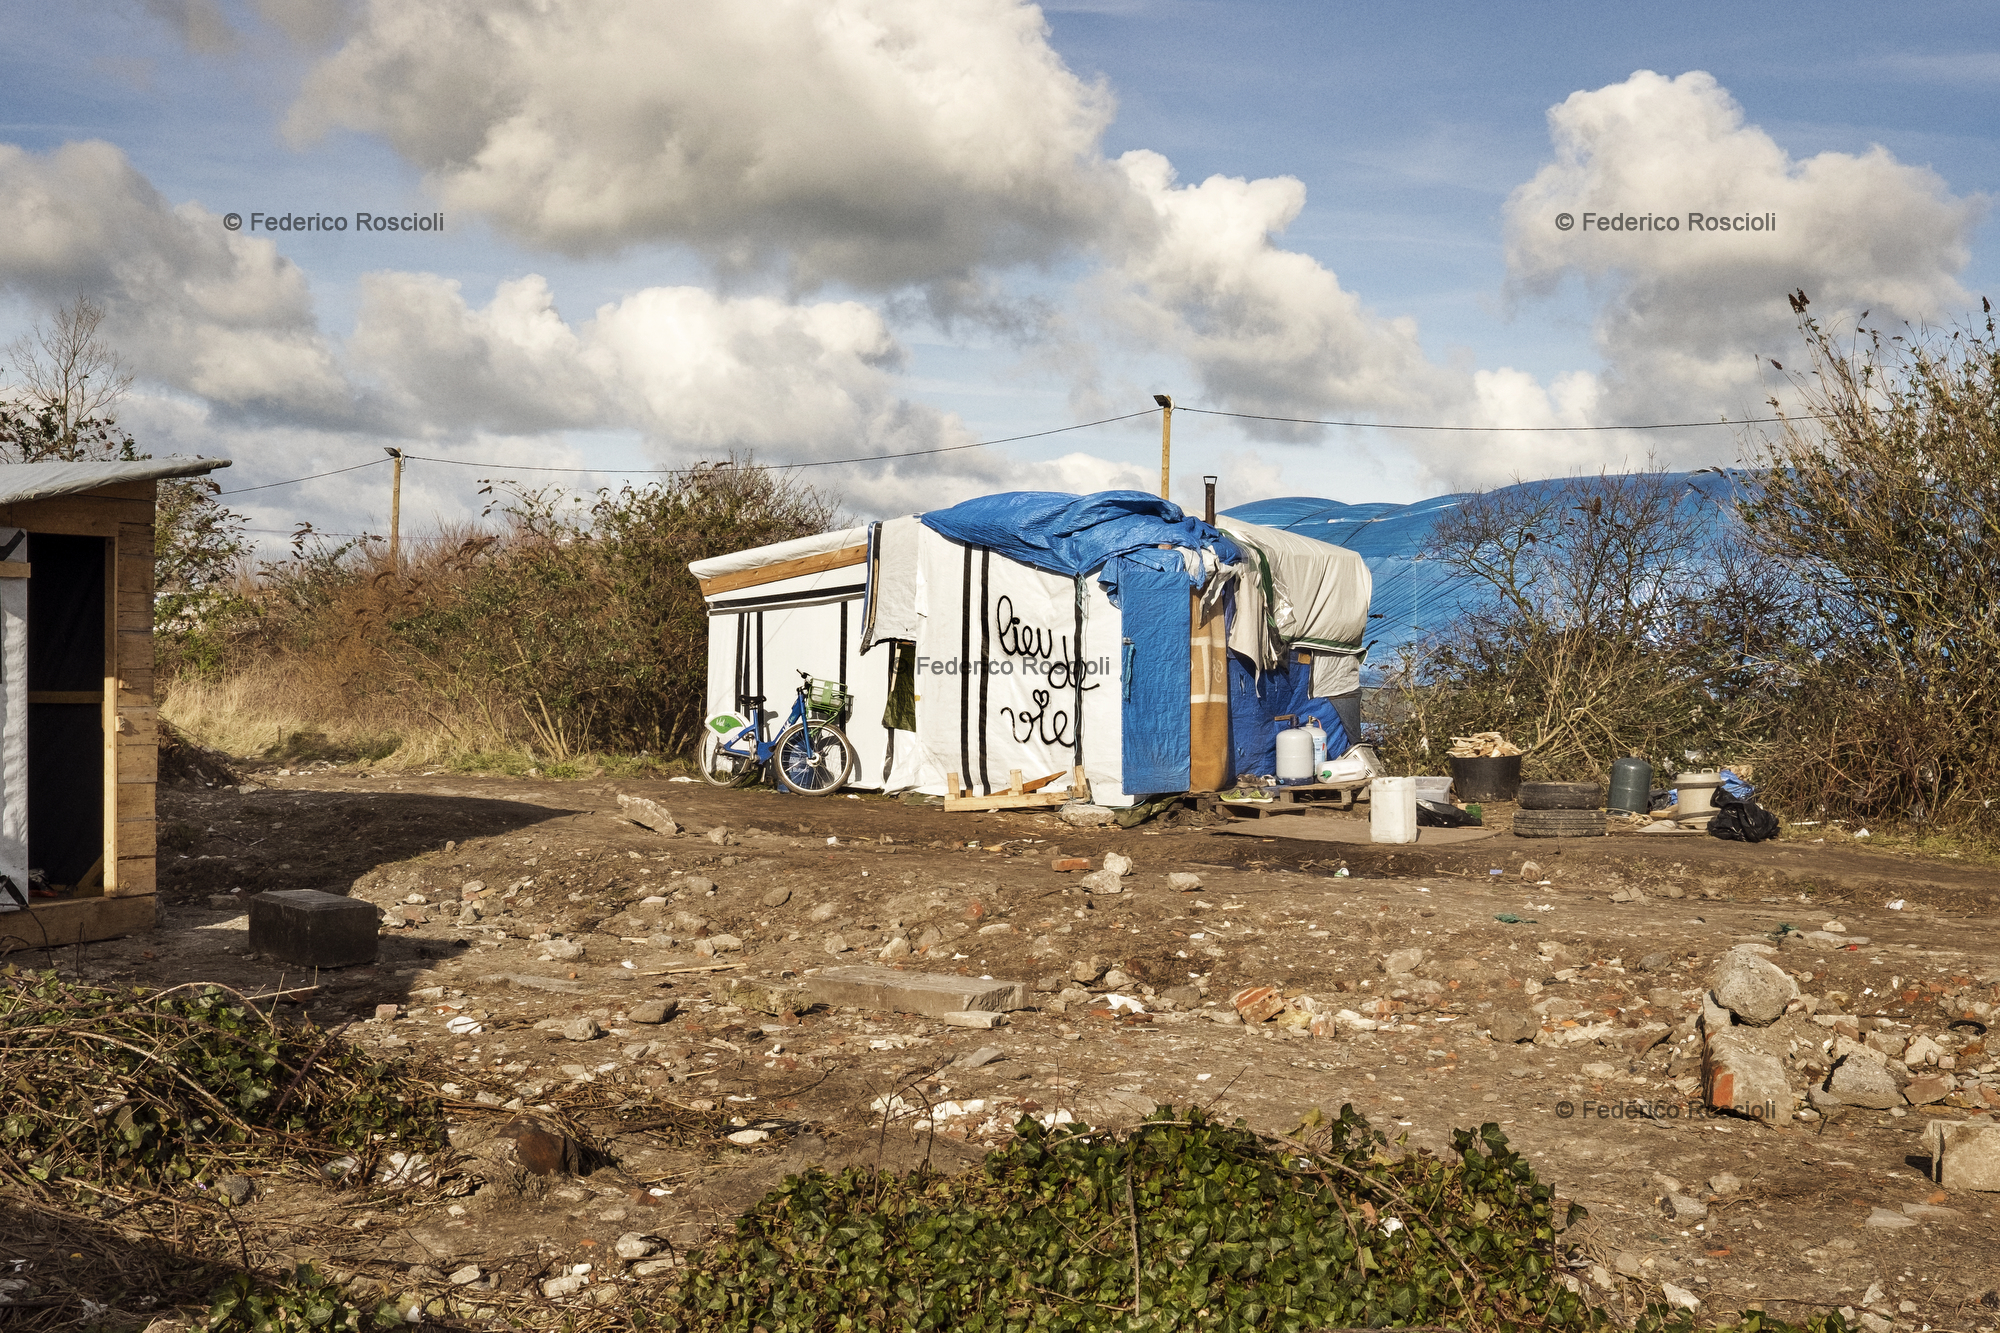 Calais, France. February 28, 2016. Lieu de vie, literally living place, was written on many tents in order to avoid them to be destroyed by the French government.